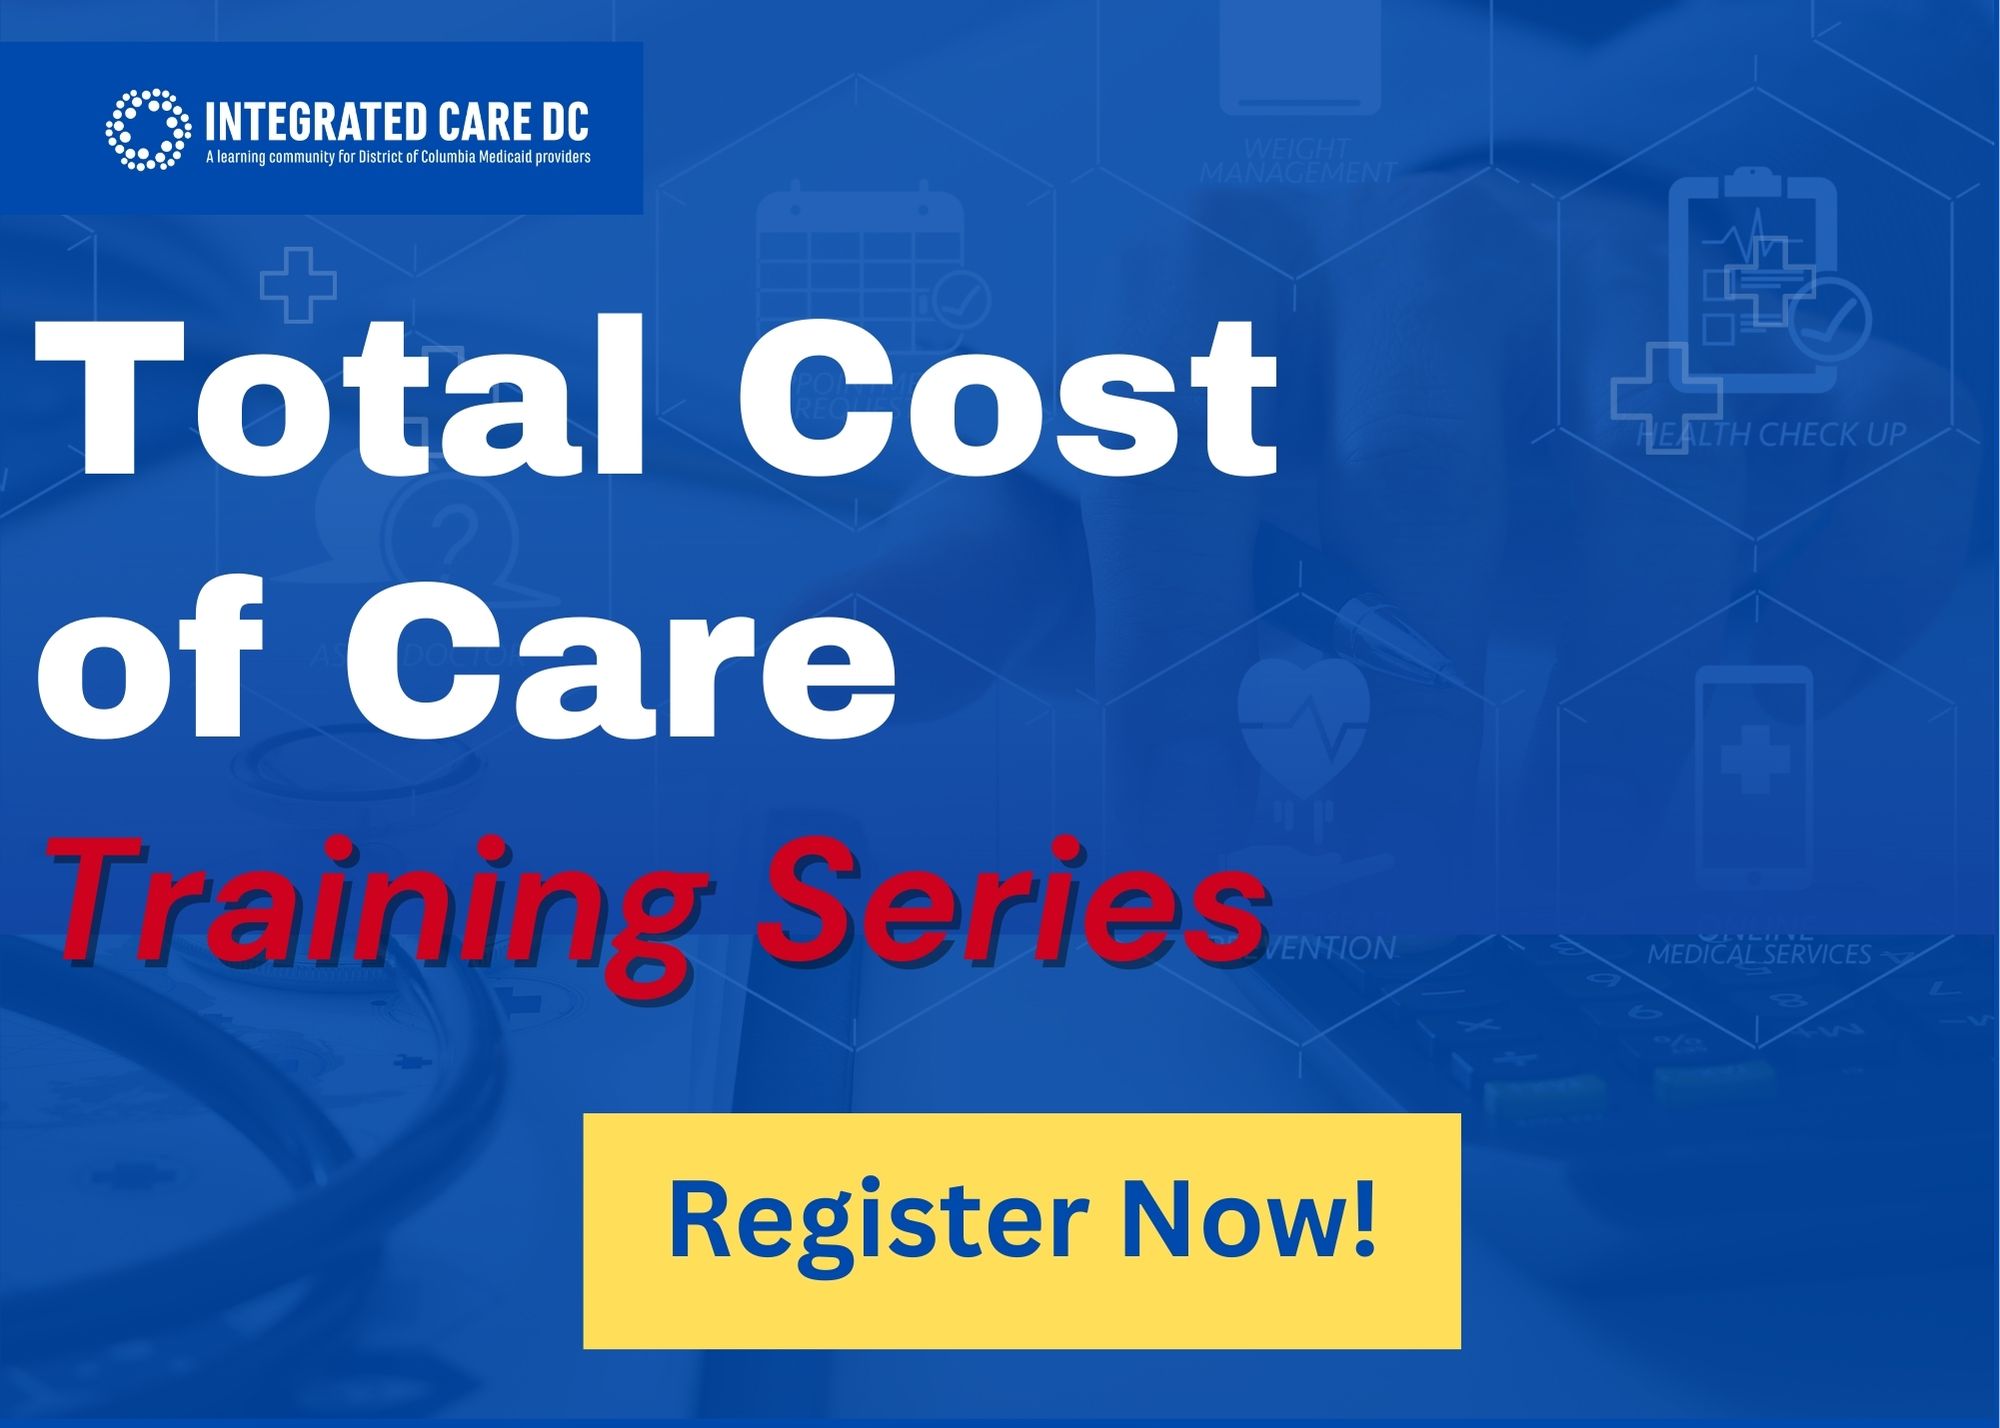 New Learning Series to Help Providers Unlock Healthcare Business Success